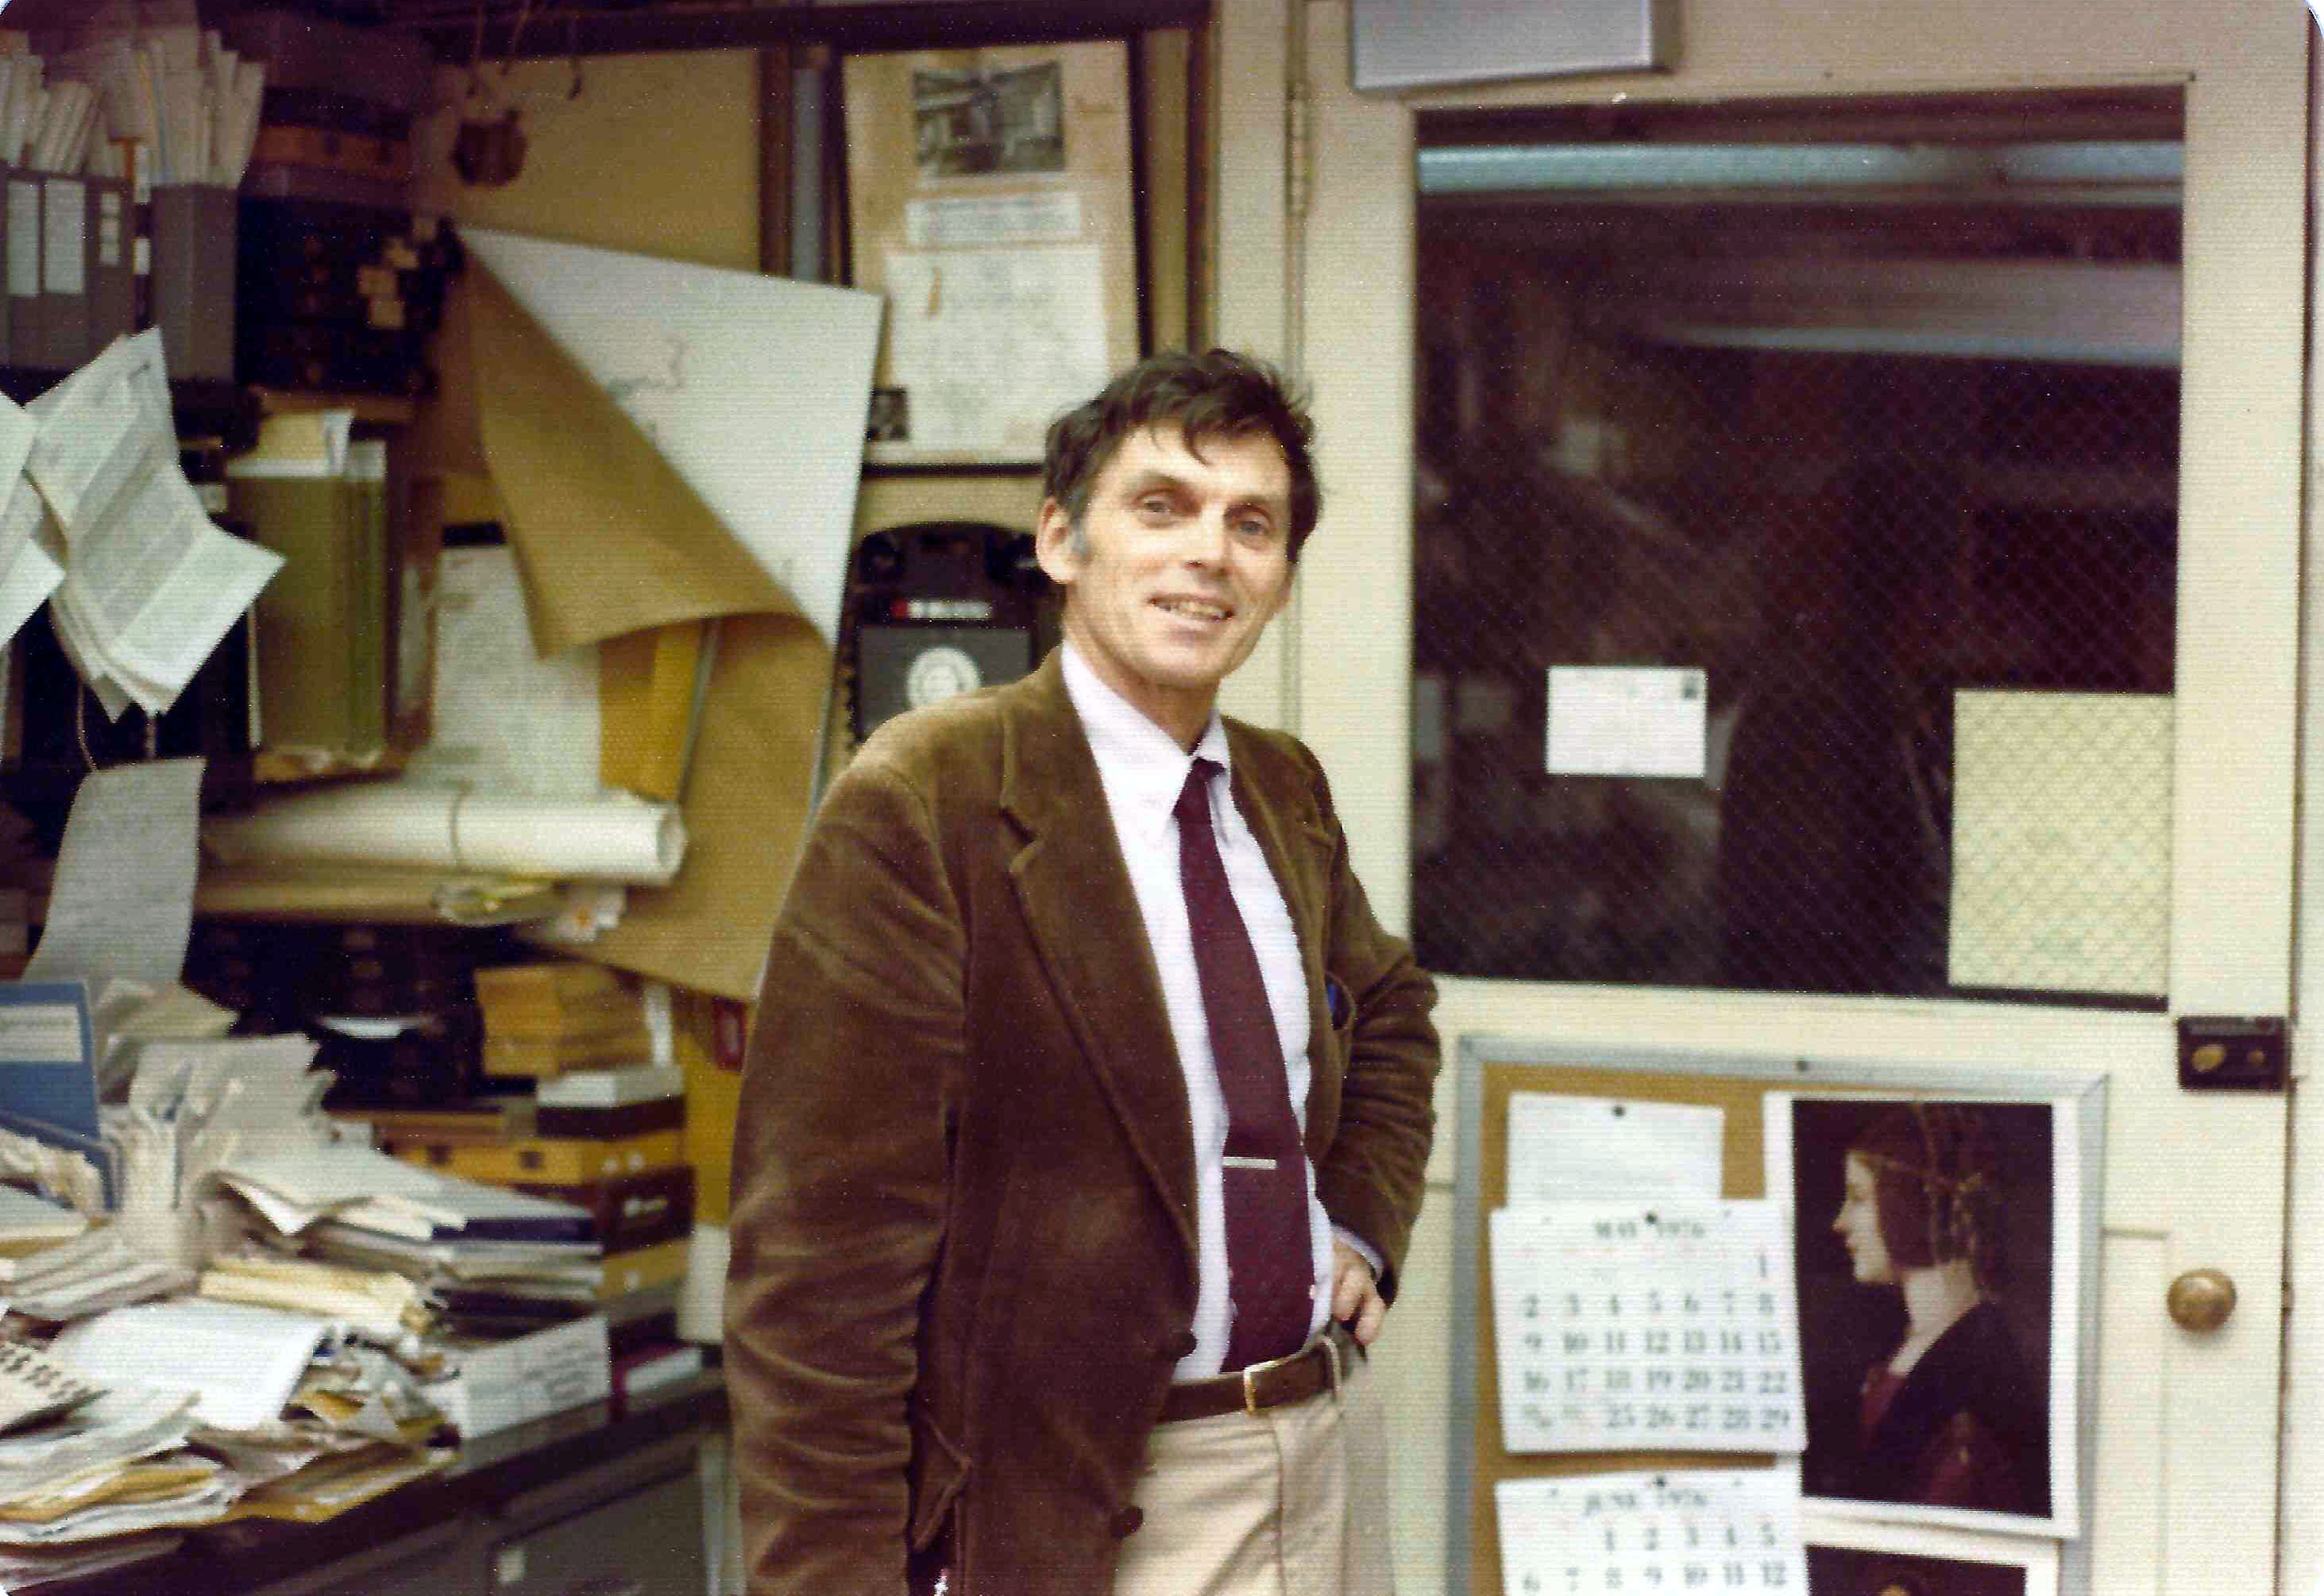 Dr Potter standing in his laboratory smiling at the camera